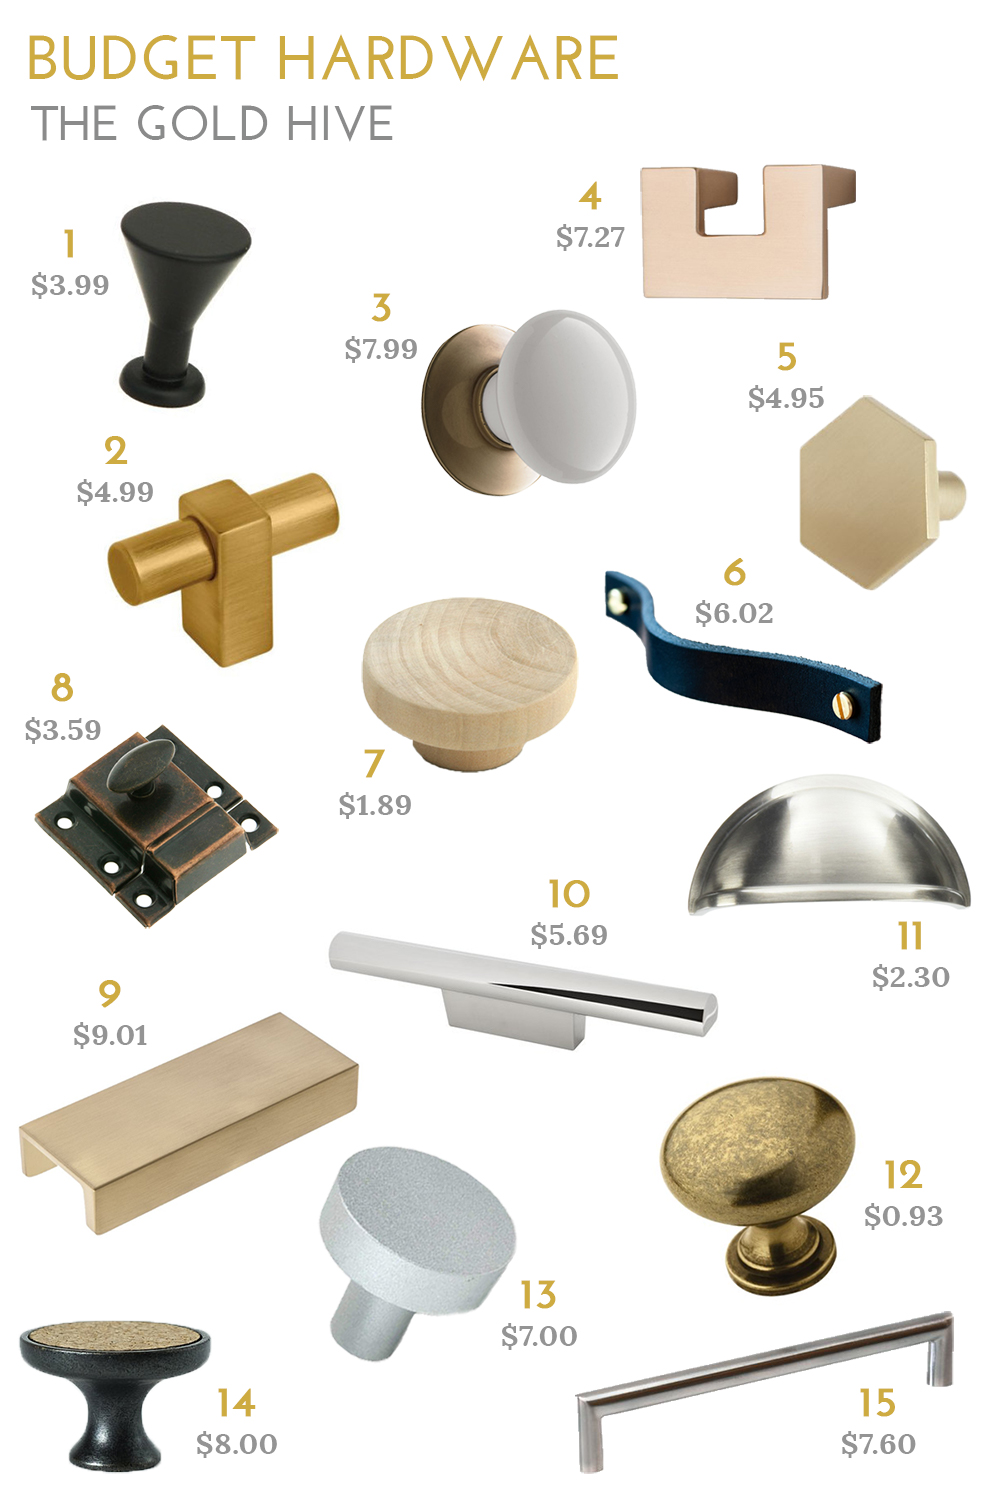 15 Unique Cabinet Knobs And Pulls For Under 10 The Gold Hive